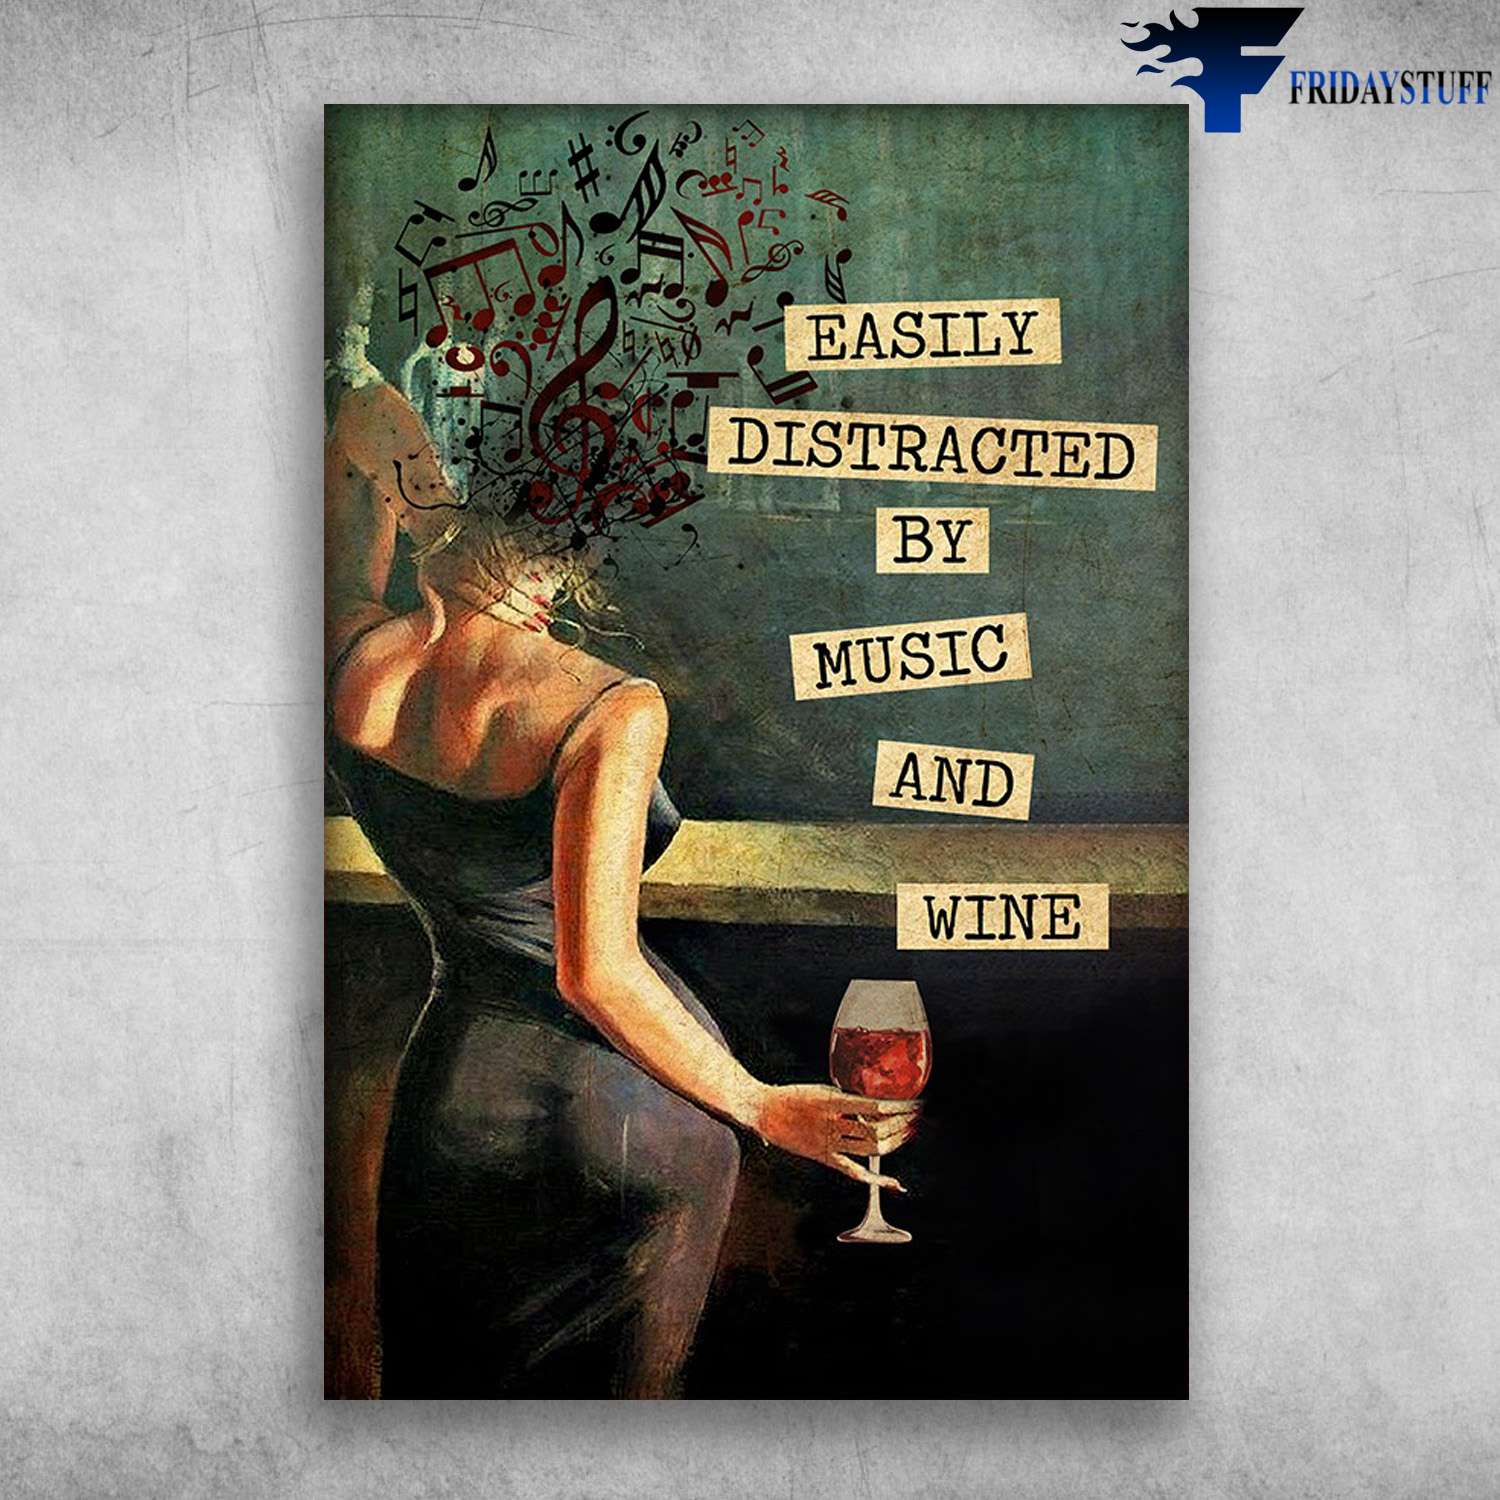 Girl Loves Music And Wine - Easily Distracted By Music And Wine